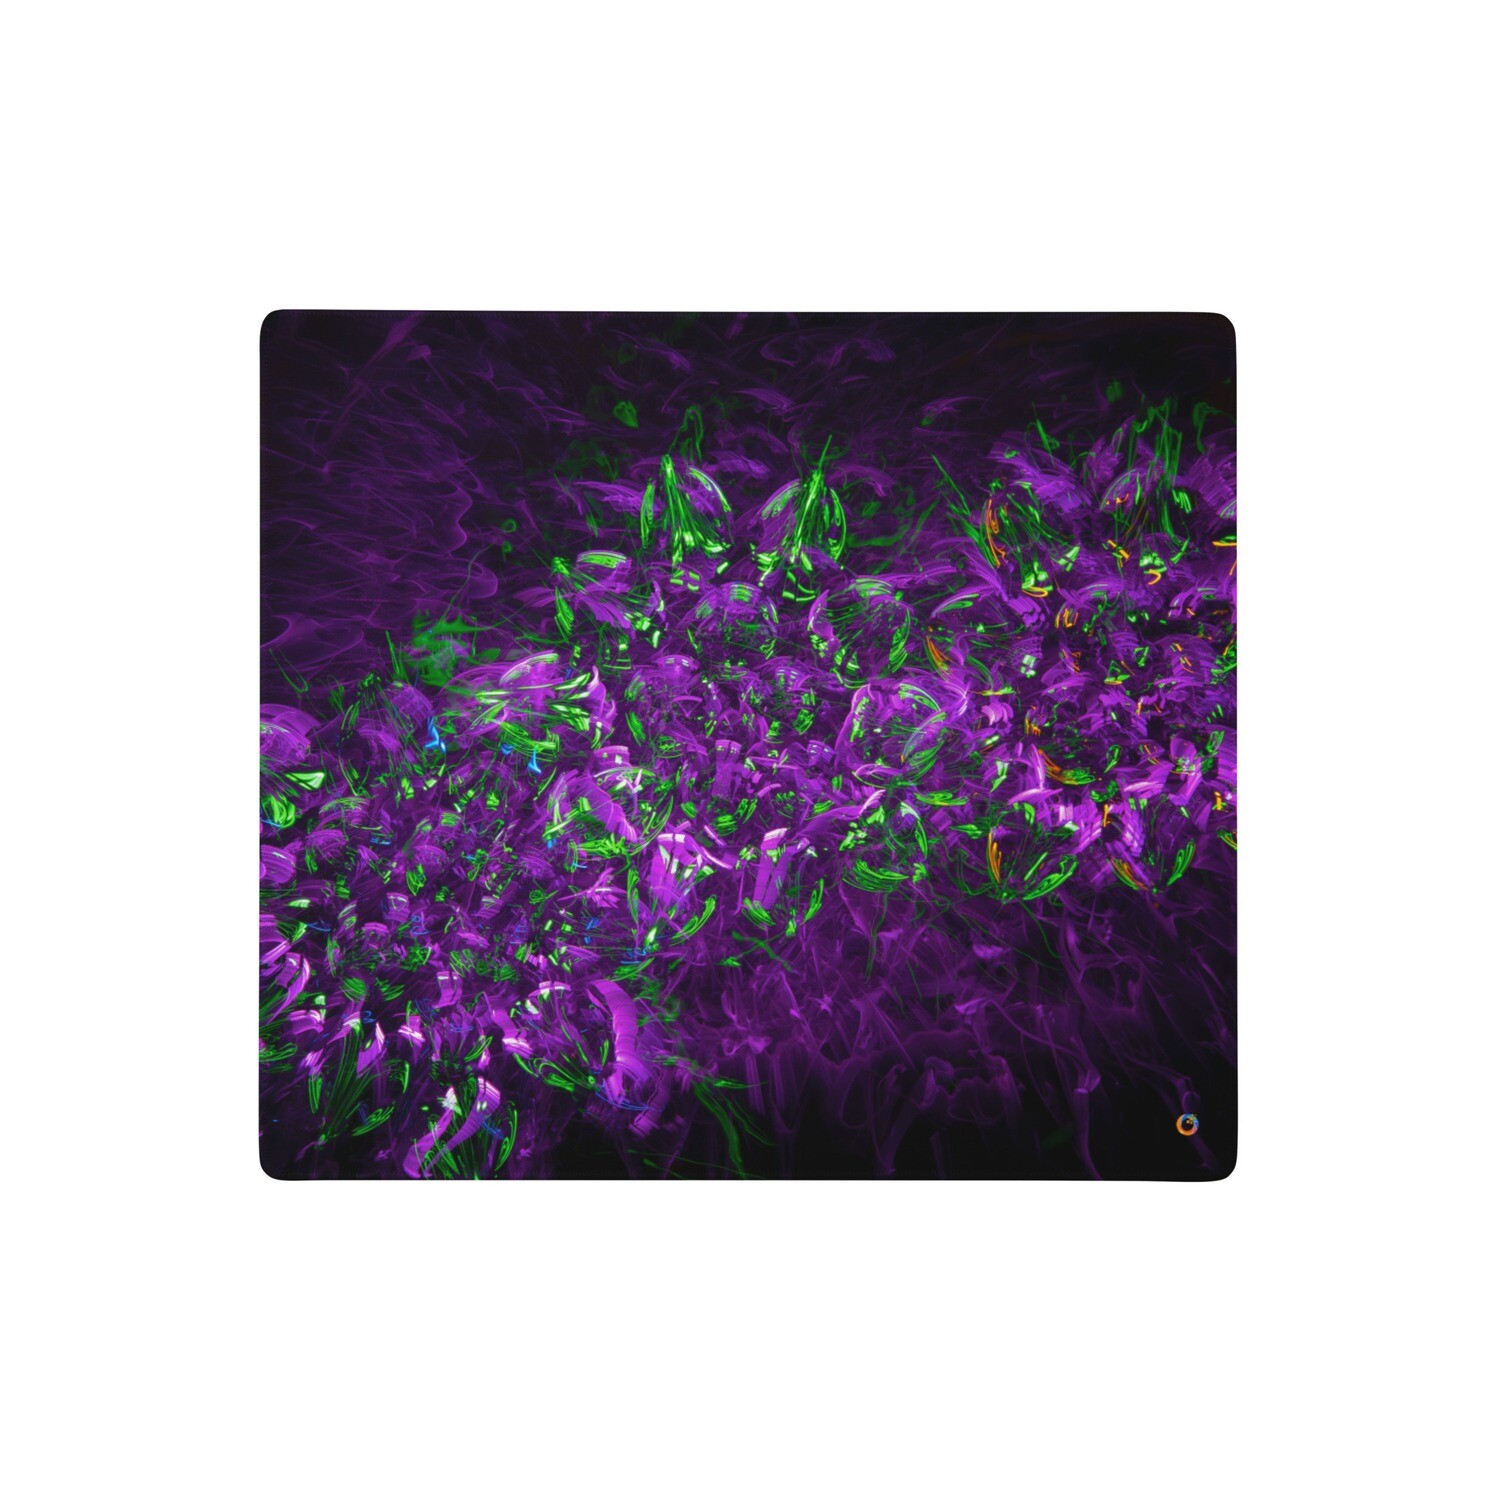 Gaming mouse pad #78